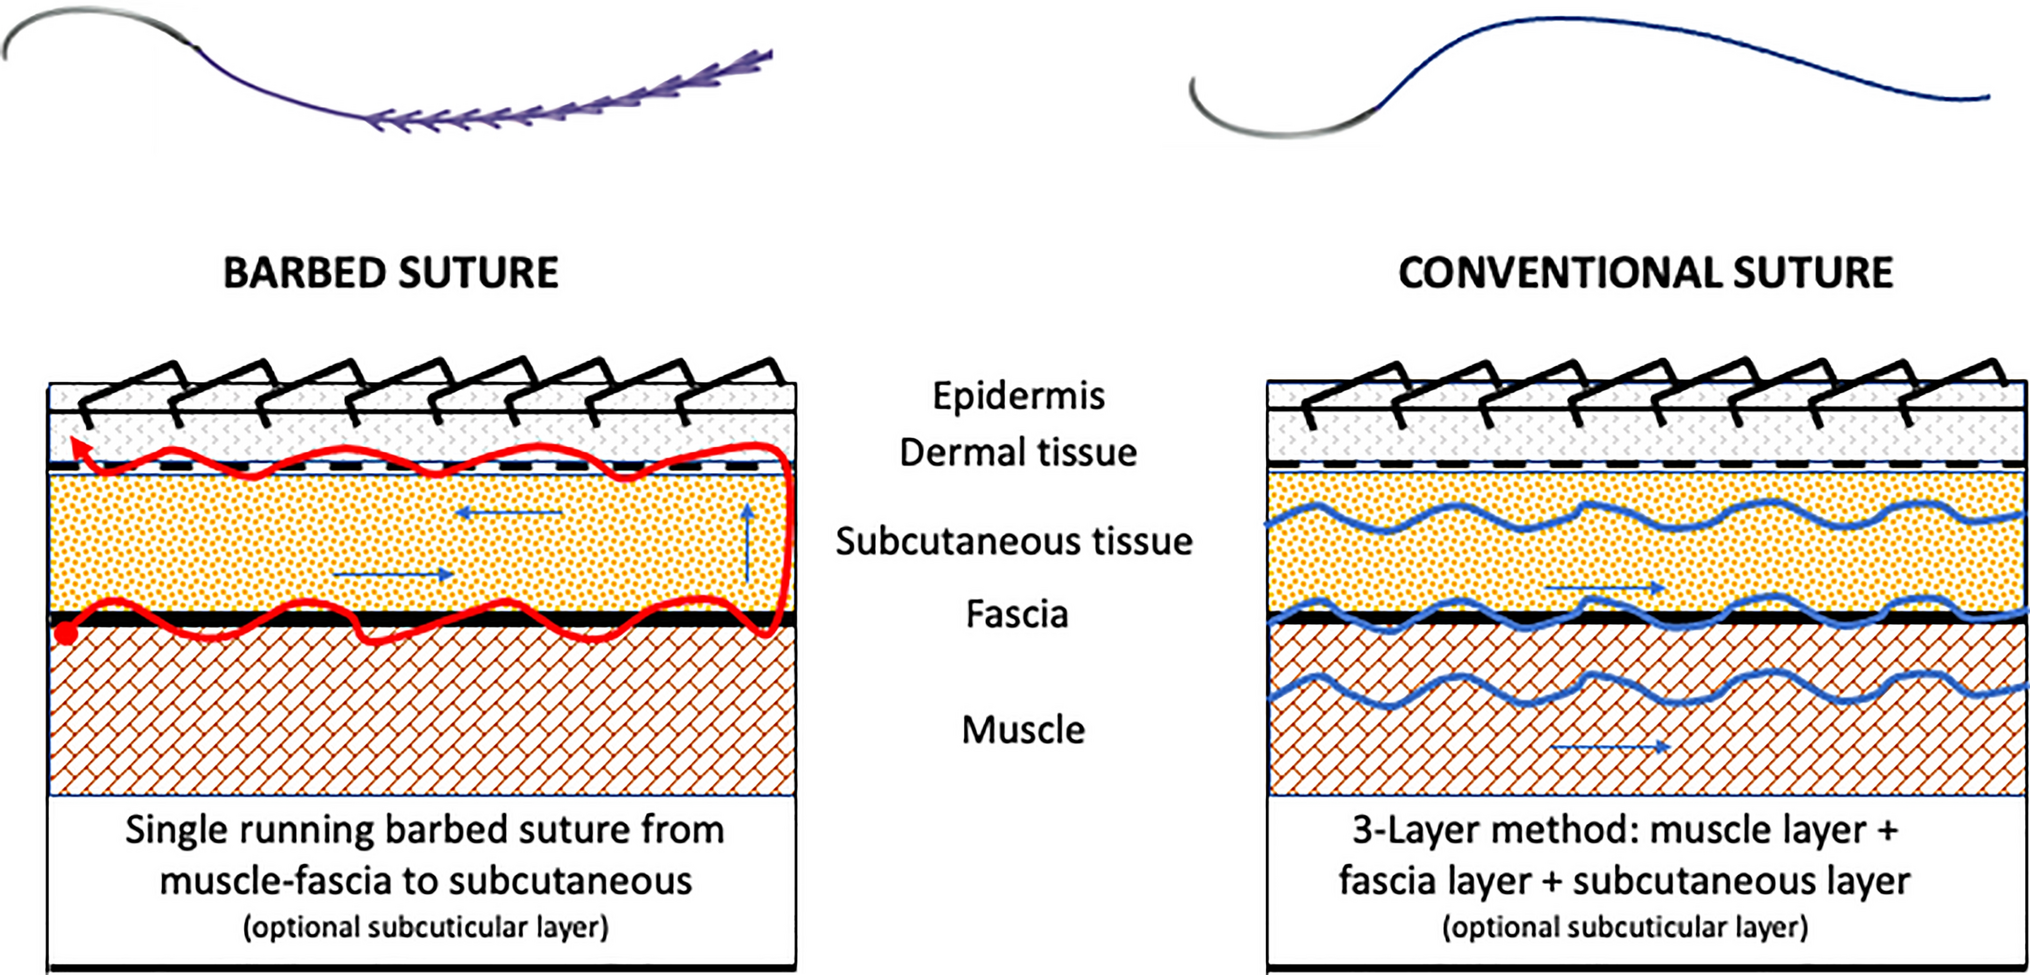 Barbed versus conventional suture in elective posterior spine surgery